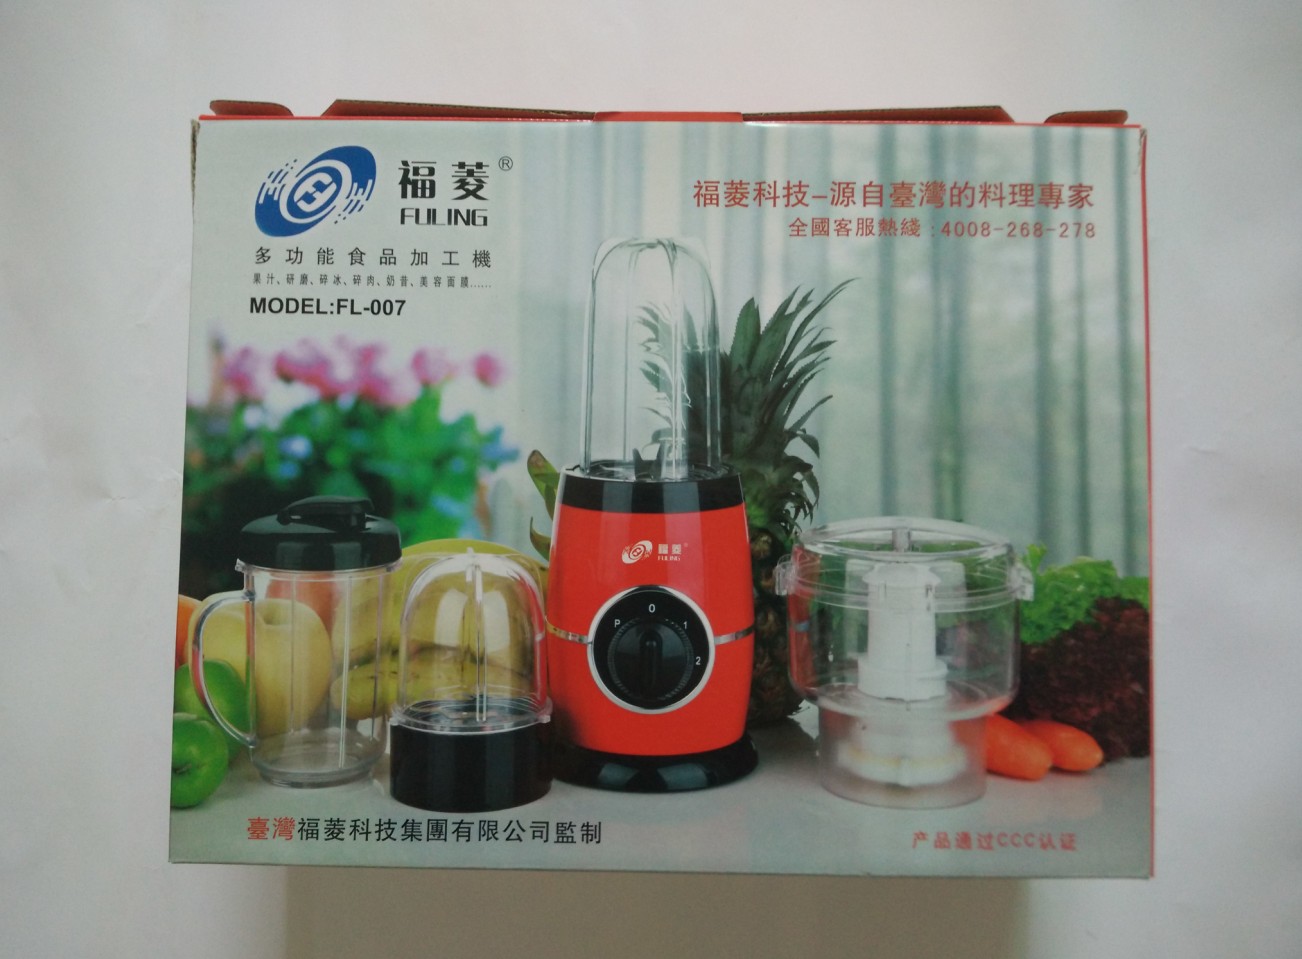 Fuling multi-functional nutrition cooking machine fl-103, home kitchen quality juicer, multi-functional cooking machine